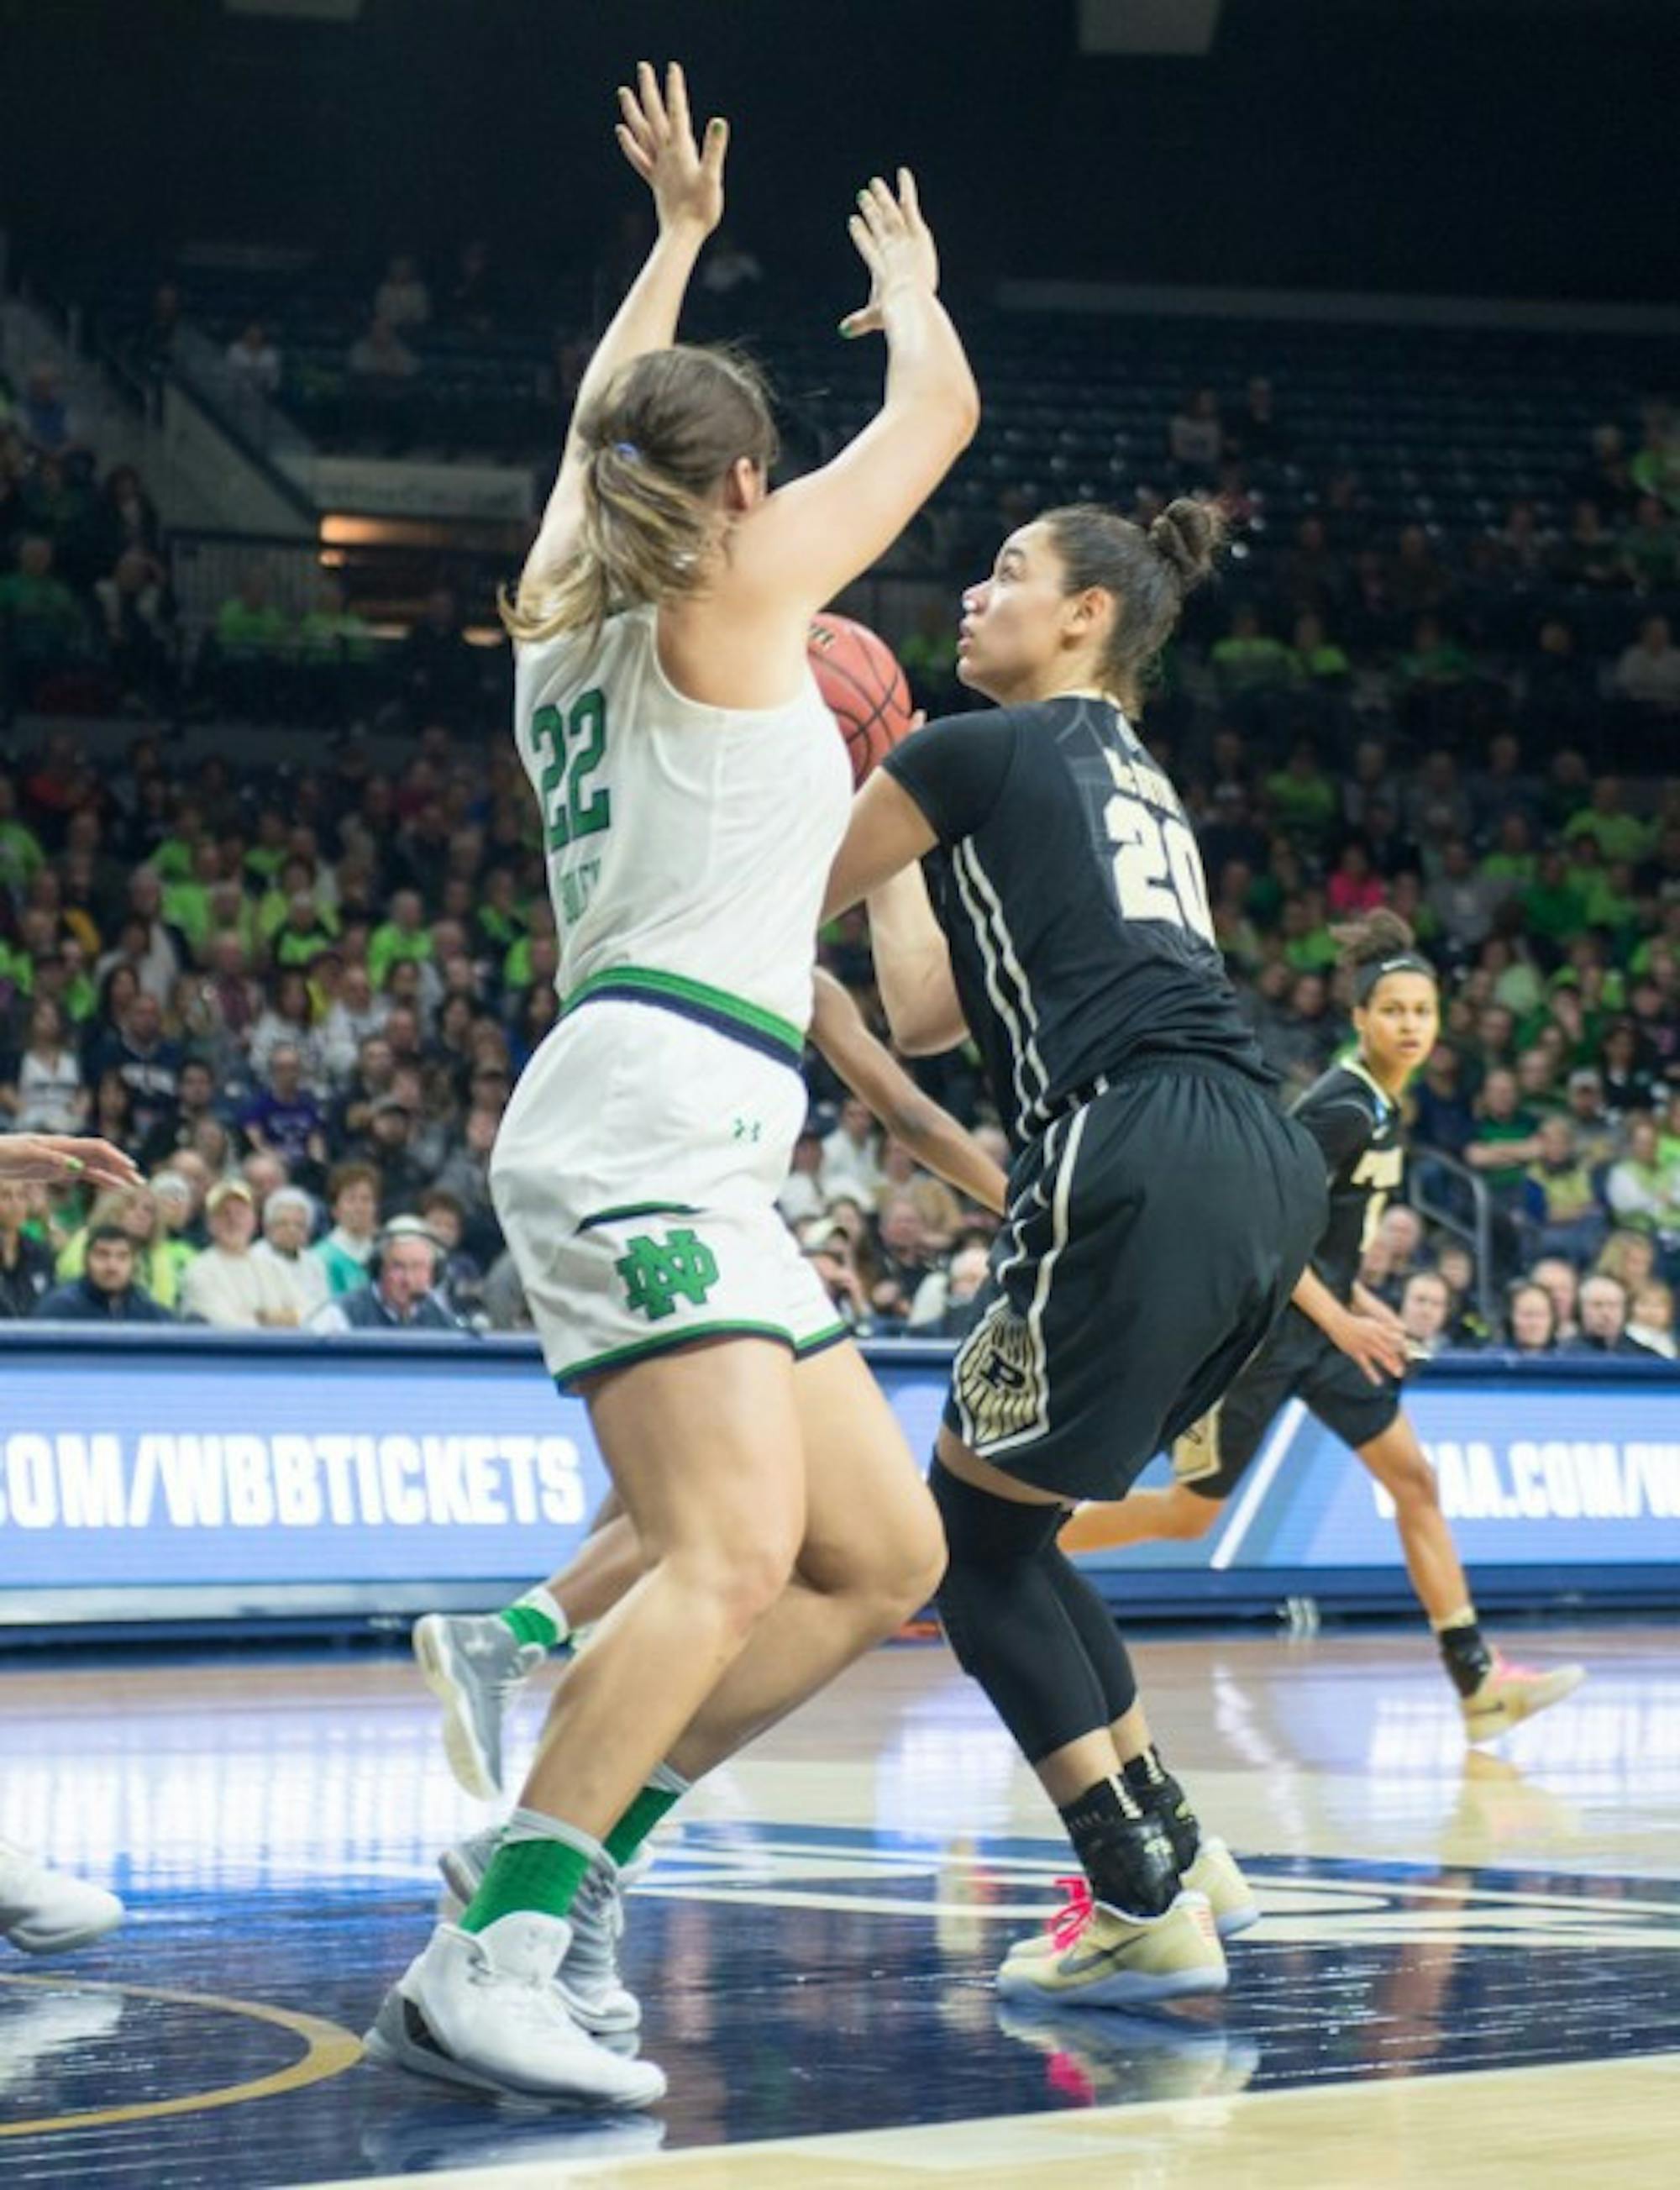 Irish freshman forward Erin Boley defends the paint against Boilermakers sophomore forward Dominique McBryde during Notre Dame’s 88-82 overtime win over Purdue on Sunday at Purcell Pavilion.